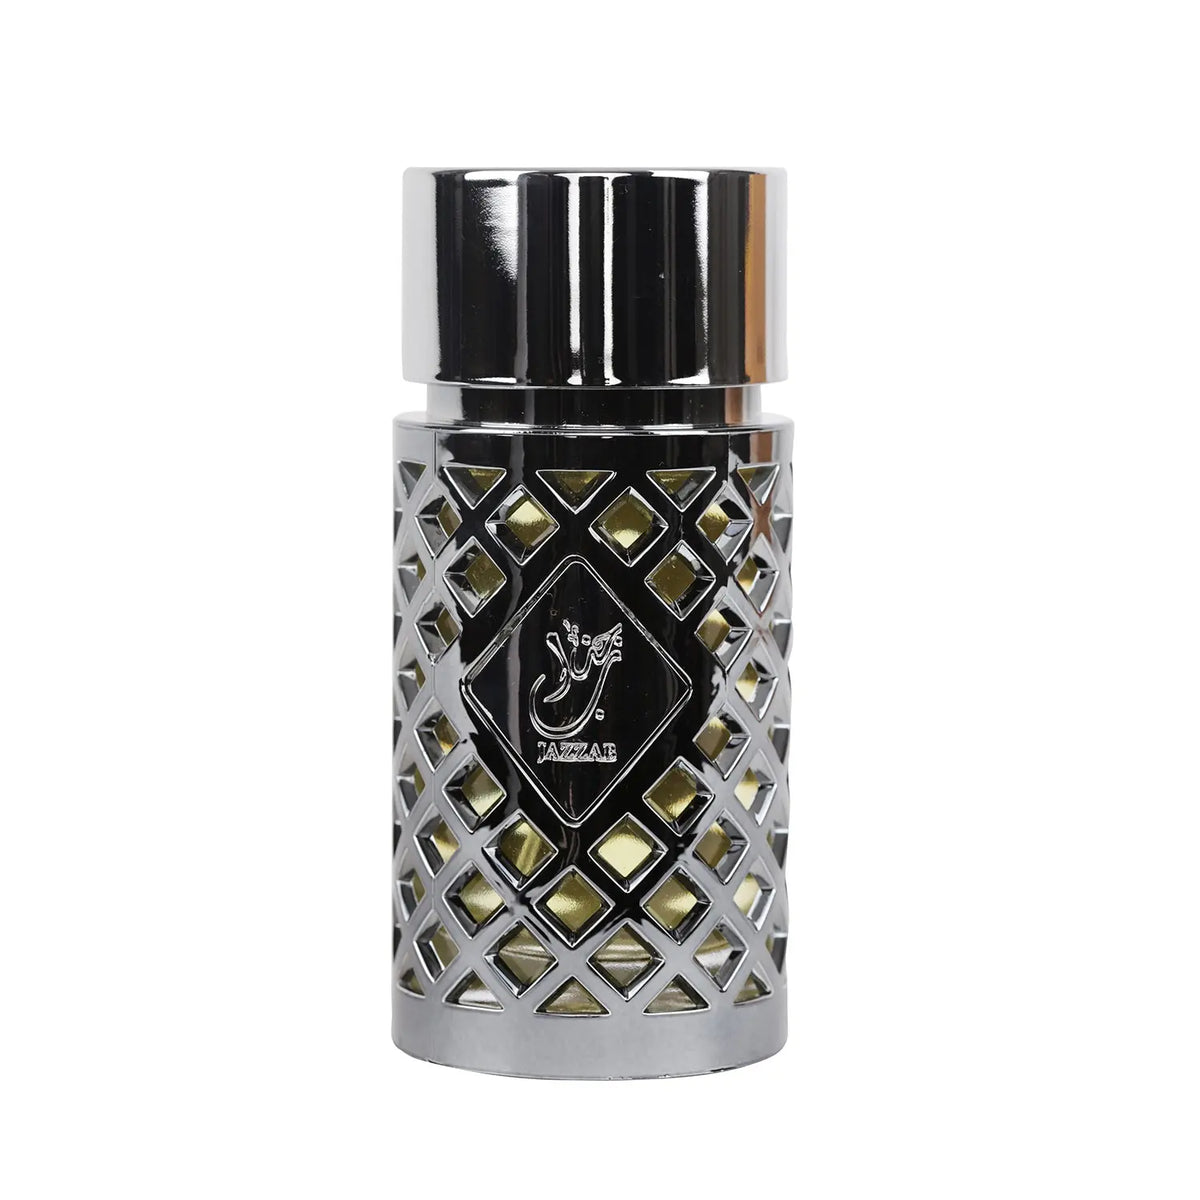 The image displays a cylindrical perfume bottle with a metallic silver finish and a black cap. It features a lattice design with diamond-shaped cutouts revealing a dark perfume inside. A black label with the name "Jazzab" in Arabic calligraphy and the brand "Ard Al Zaafaran" is placed in the center of the bottle. The overall aesthetic suggests a modern and sophisticated fragrance product.